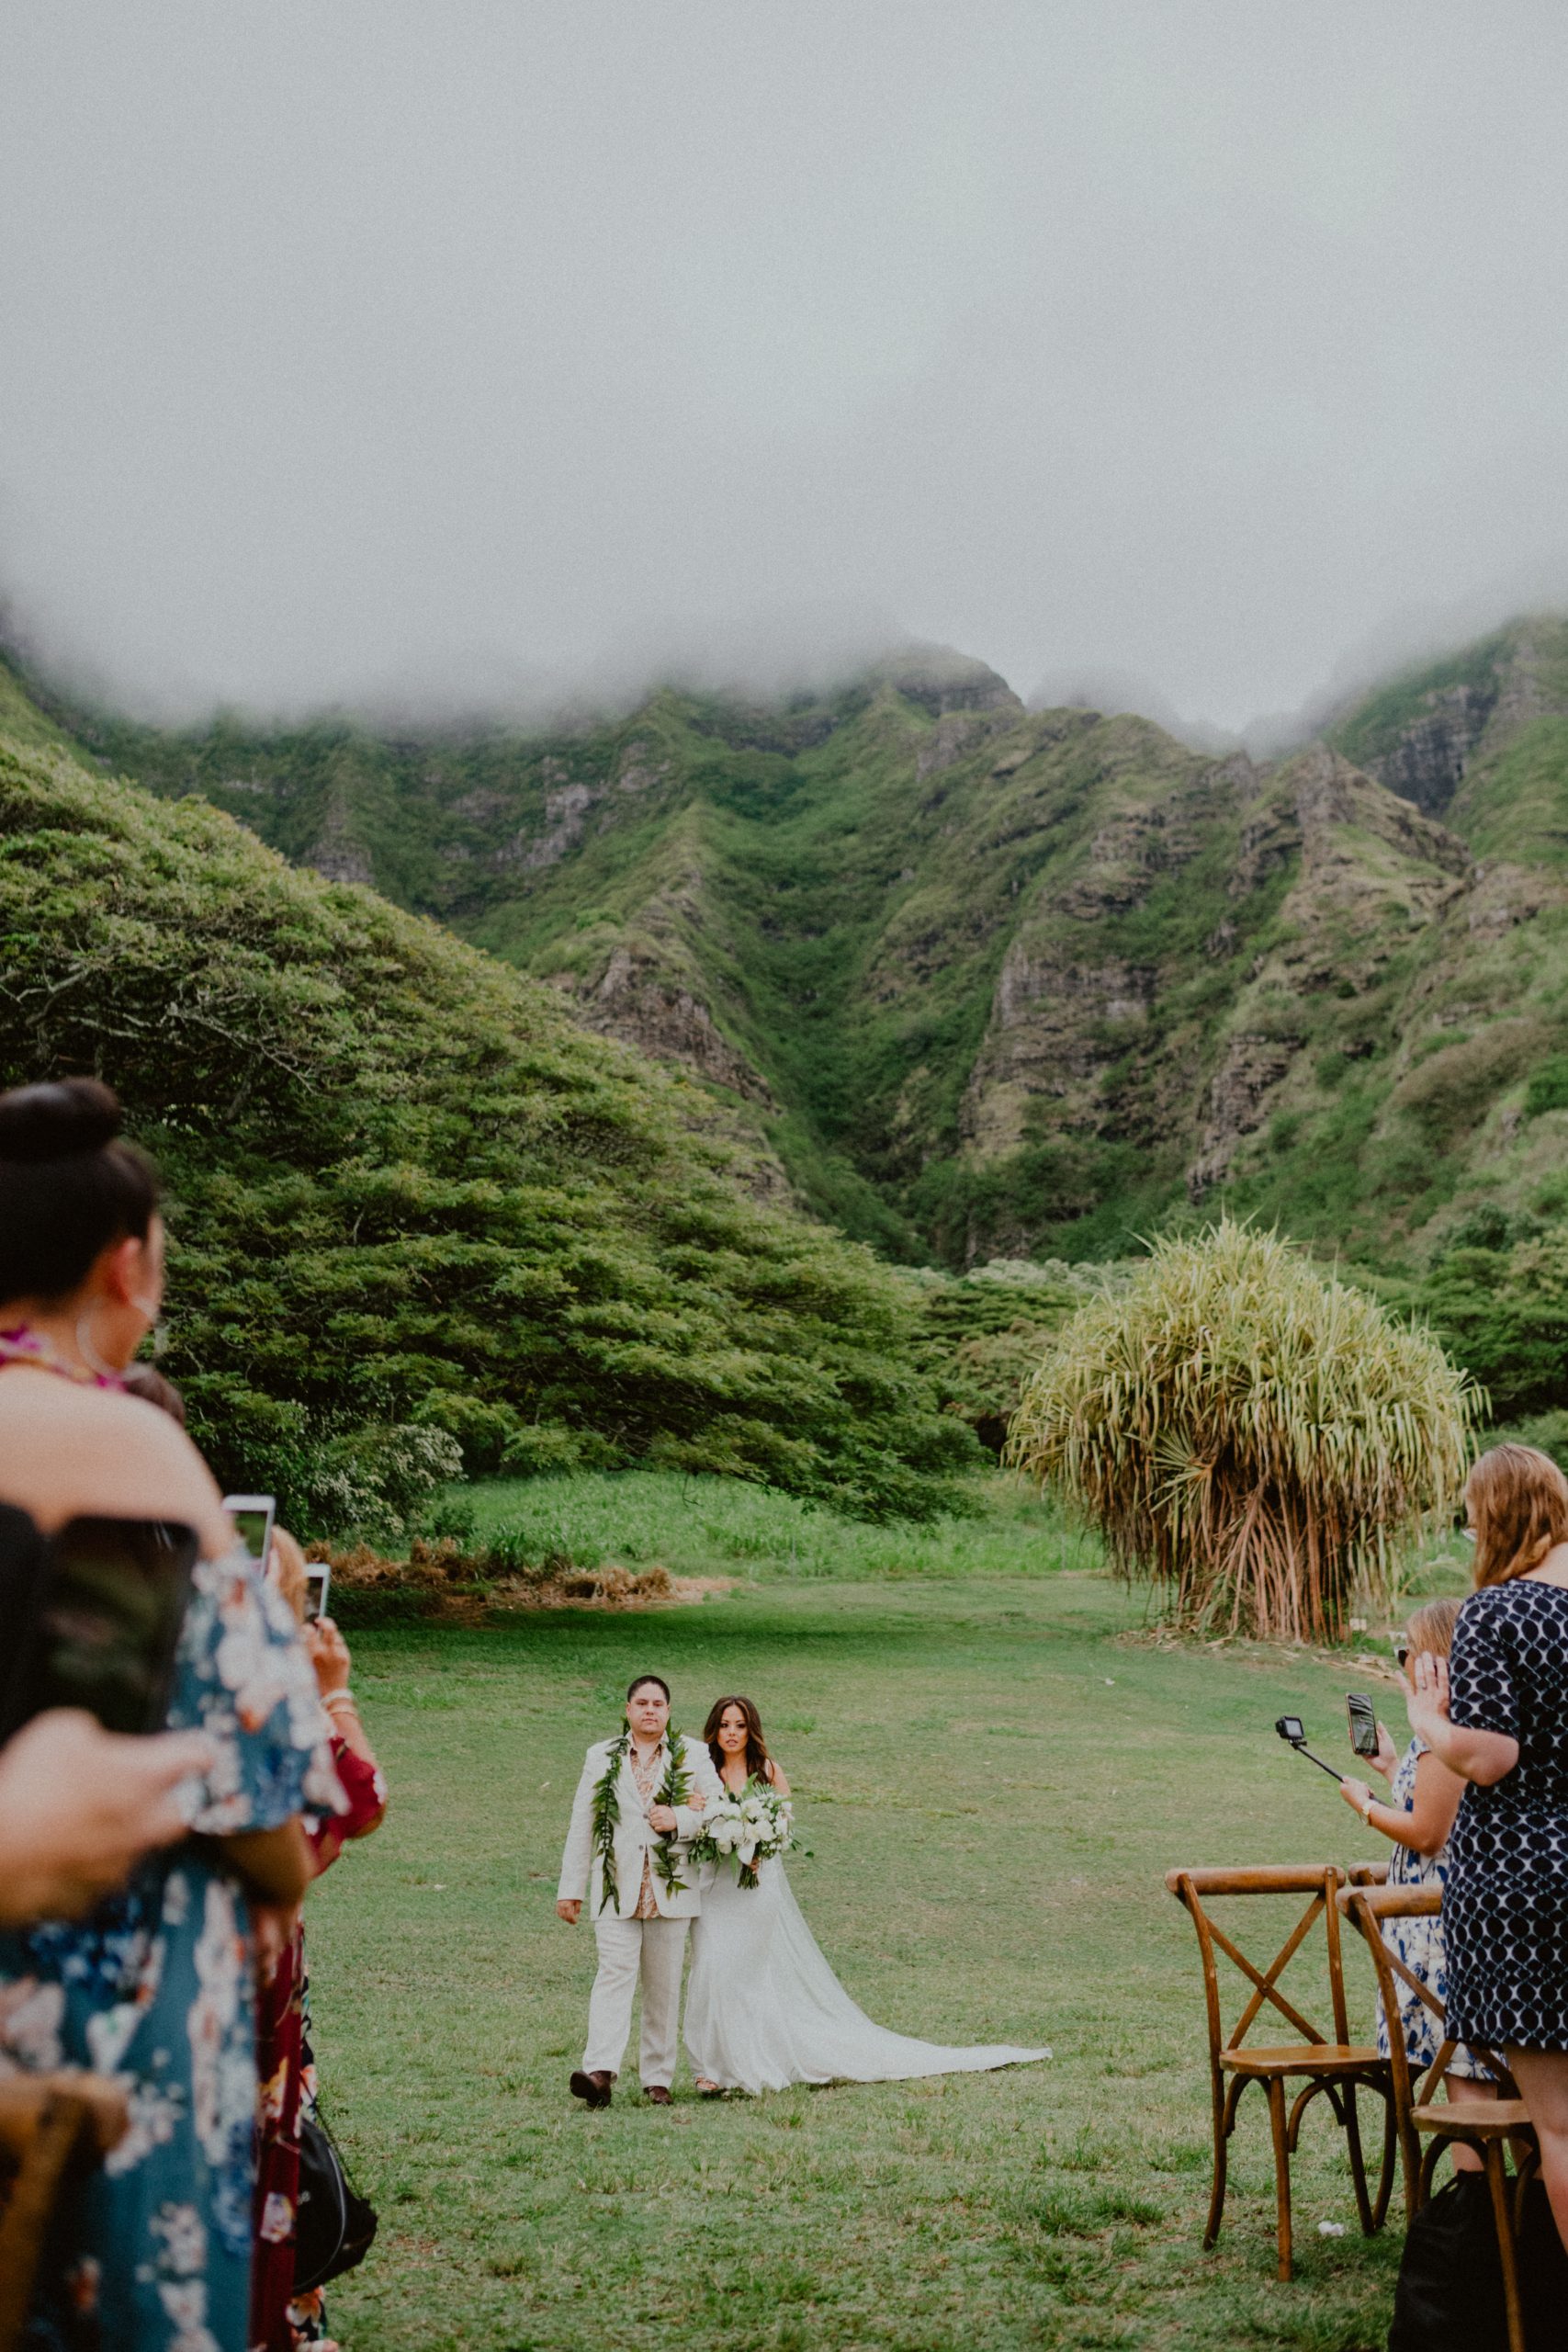 Bride walks down the aisle in front of a gorgeous background of Hawaiian mountains and countryside while wedding guests watch her look at her walking down the aisle | Oahu Wedding Photographer, Oahu Elopement Photographer, Destination Wedding Photographer, Destination Elopement Photographer, Newlywed moments ideas, Newlywed Photography inspiration, Hawaii Elopement ideas | chelseaabril.com